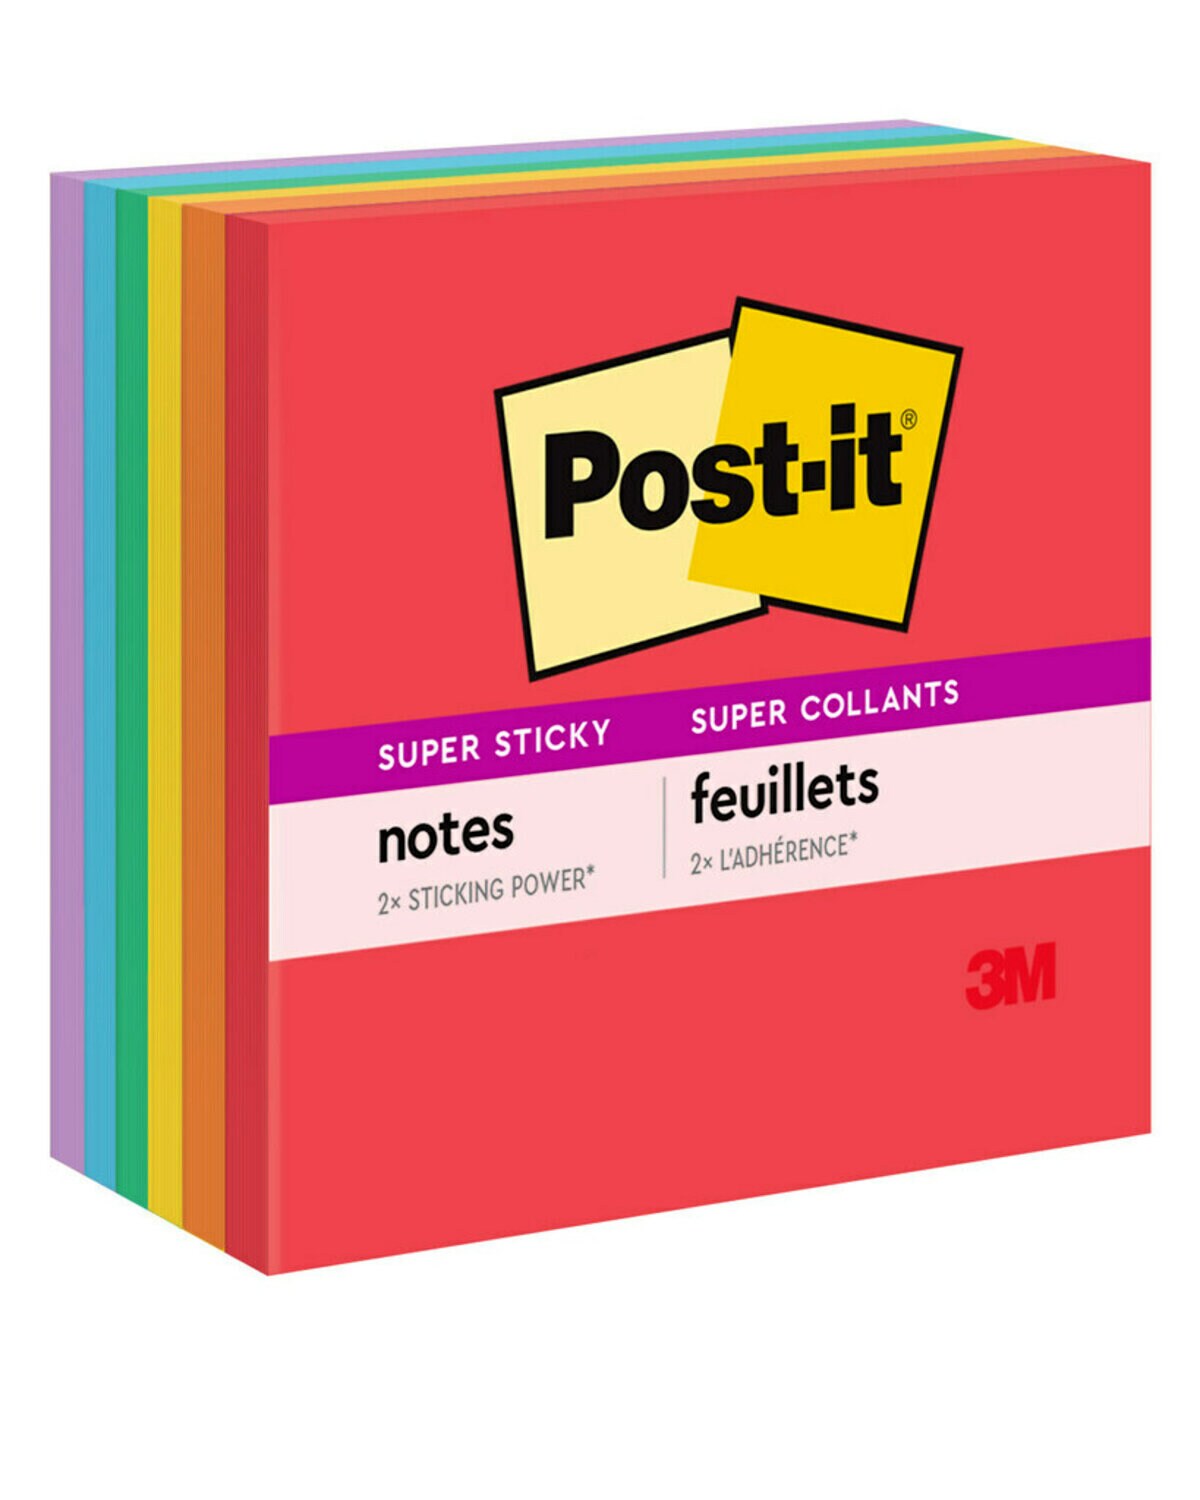 Post It extreme Xl note holder & Refills 4x6